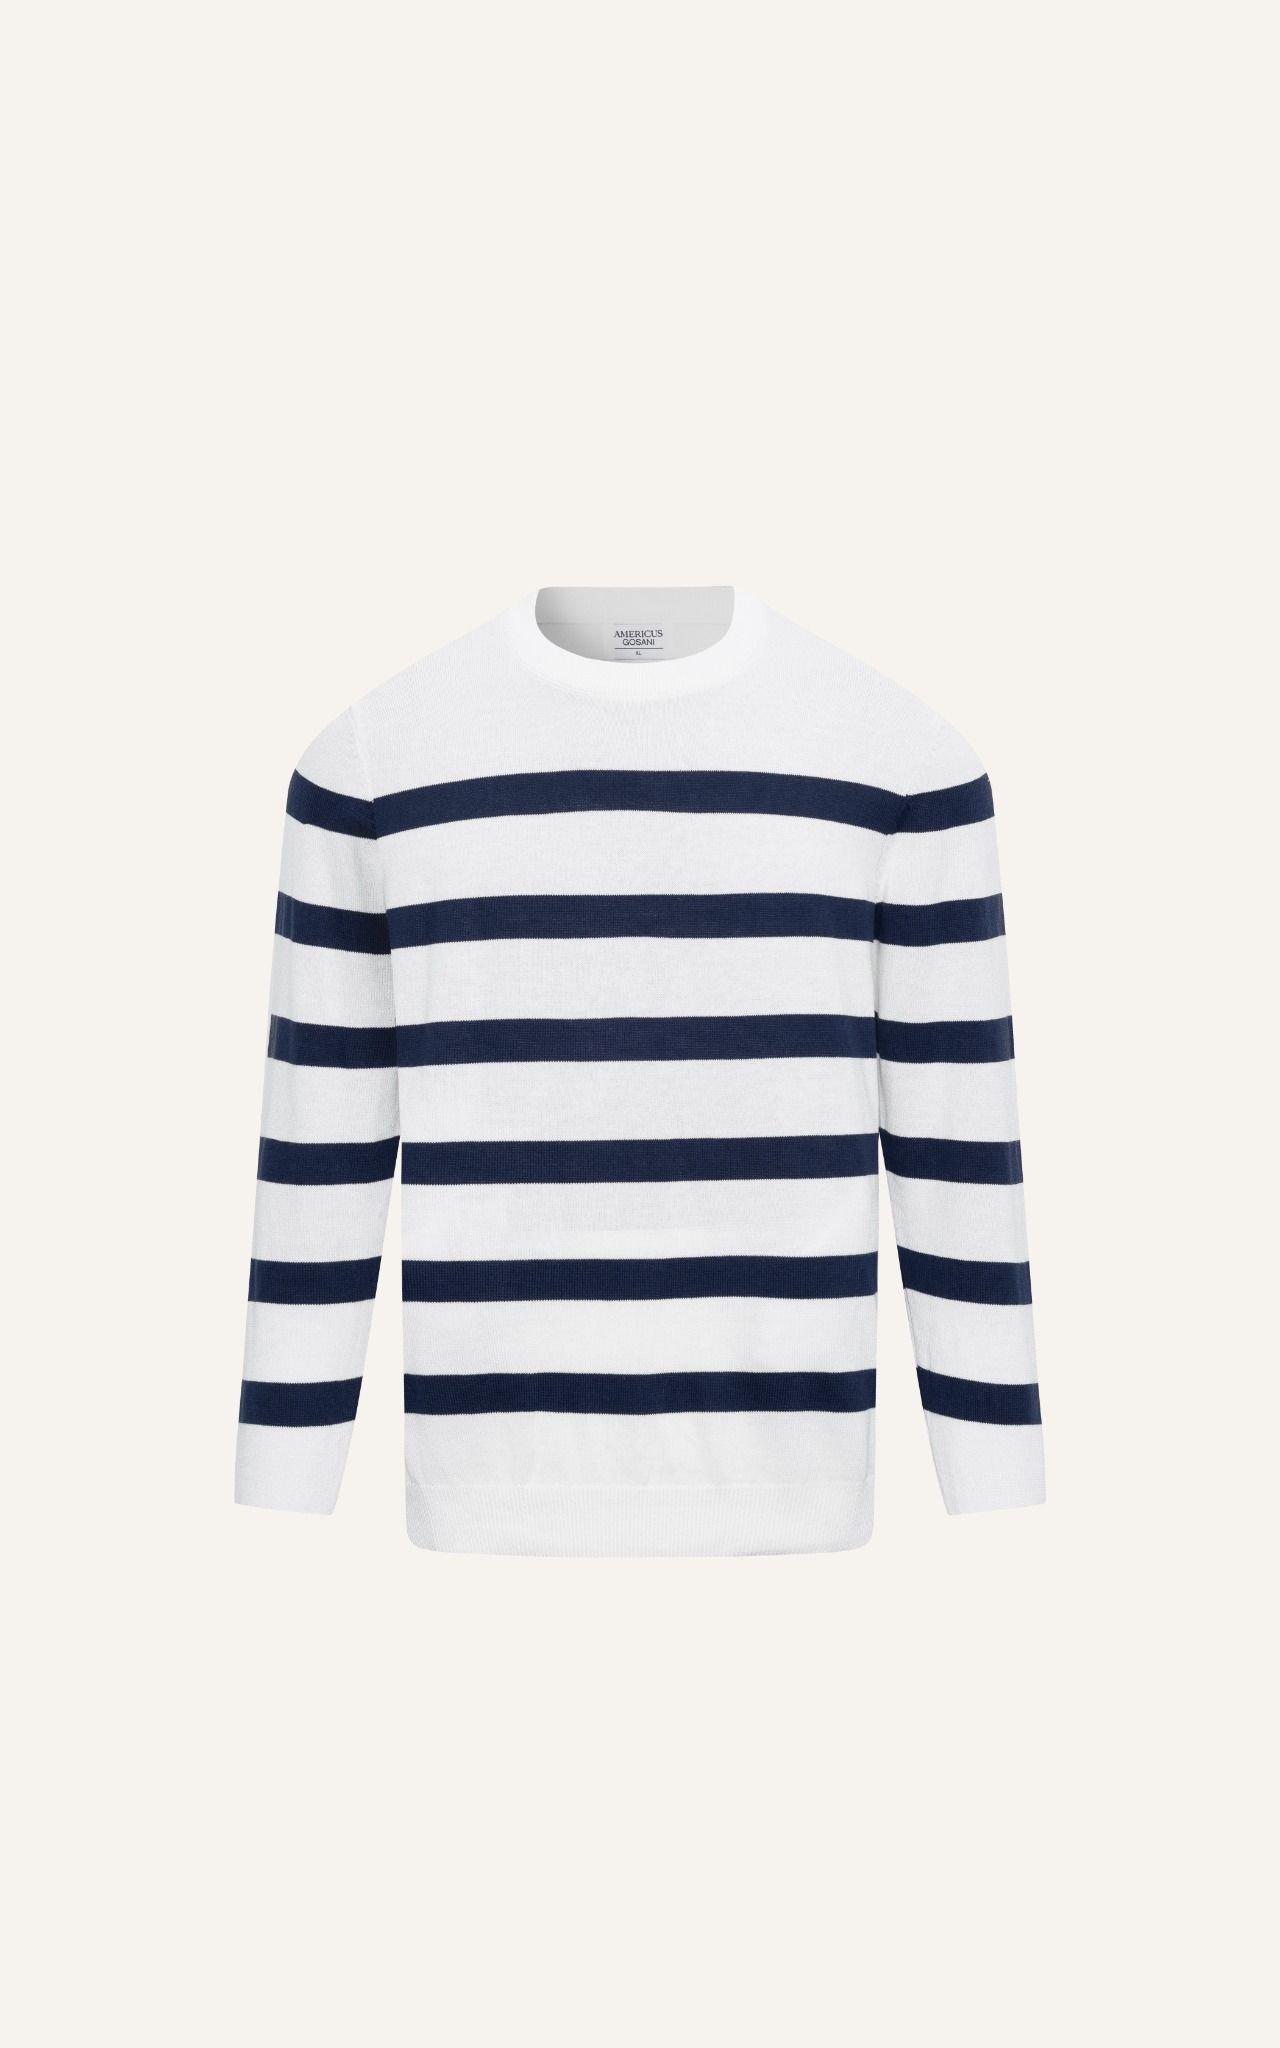  AG708 STUDIO REGULAR FIT STRIPED KNIT SWEATER - OFF WHITE 